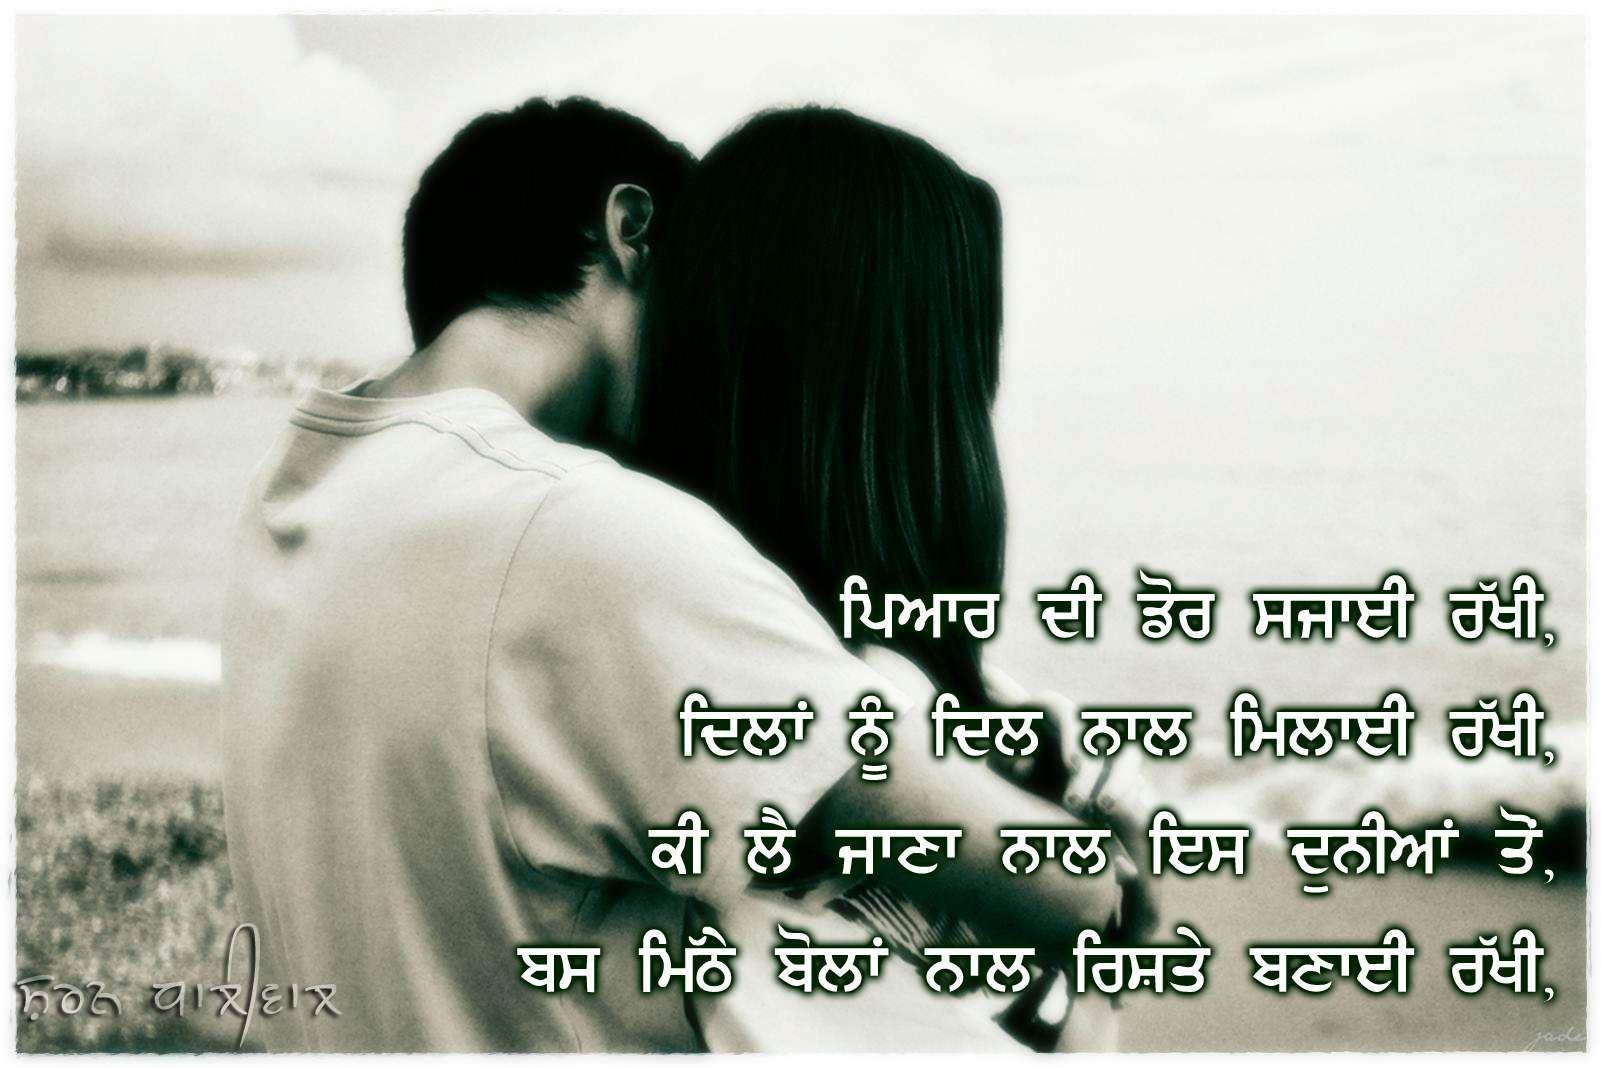 Image for Romantic Love Quotes For Him In Punjabi.